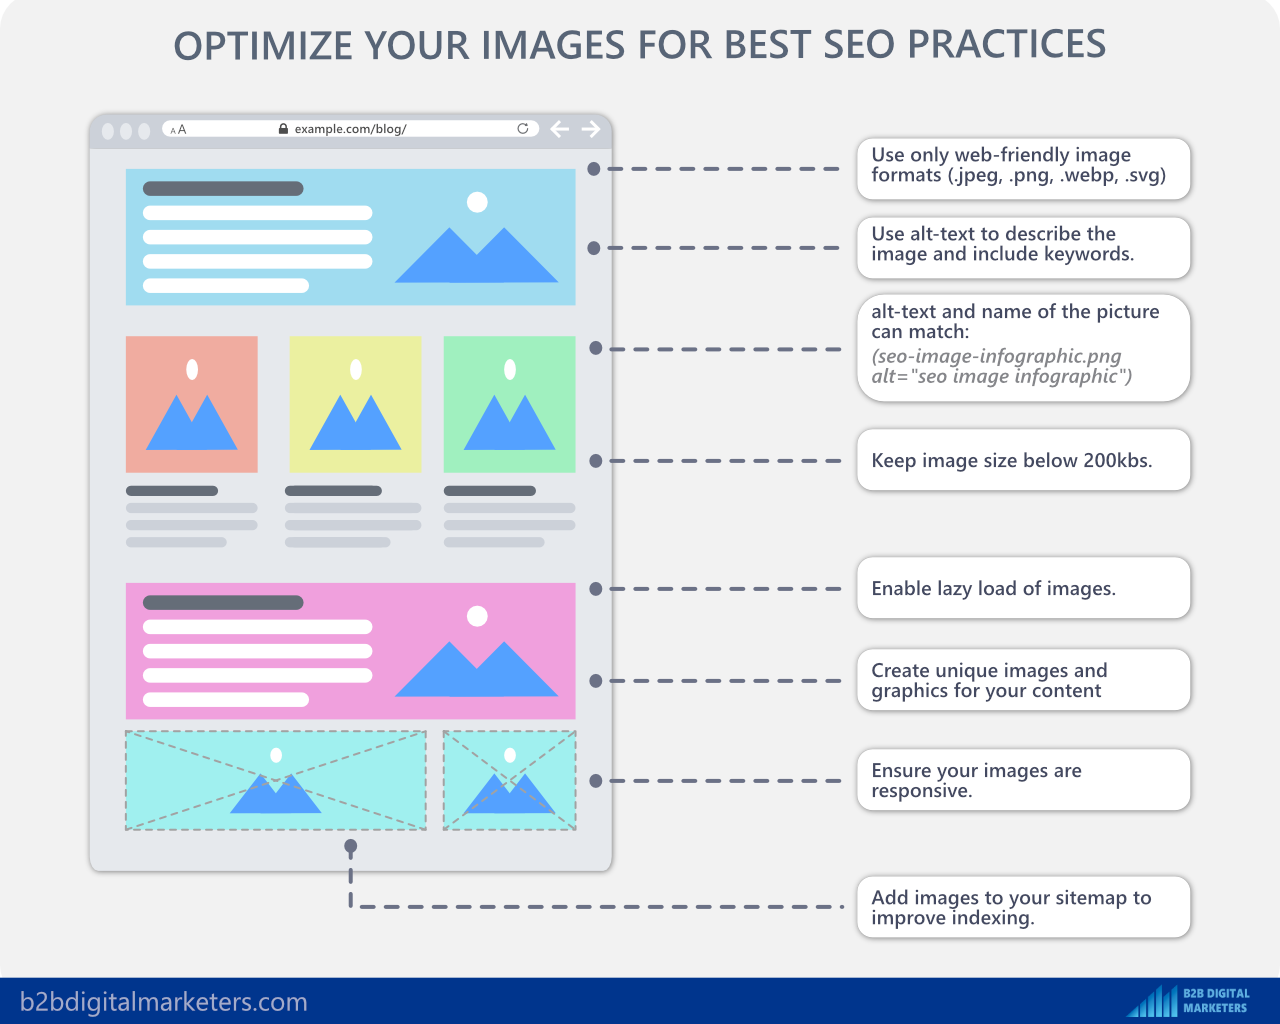 image seo checklist infographic for b2b seo best practices.